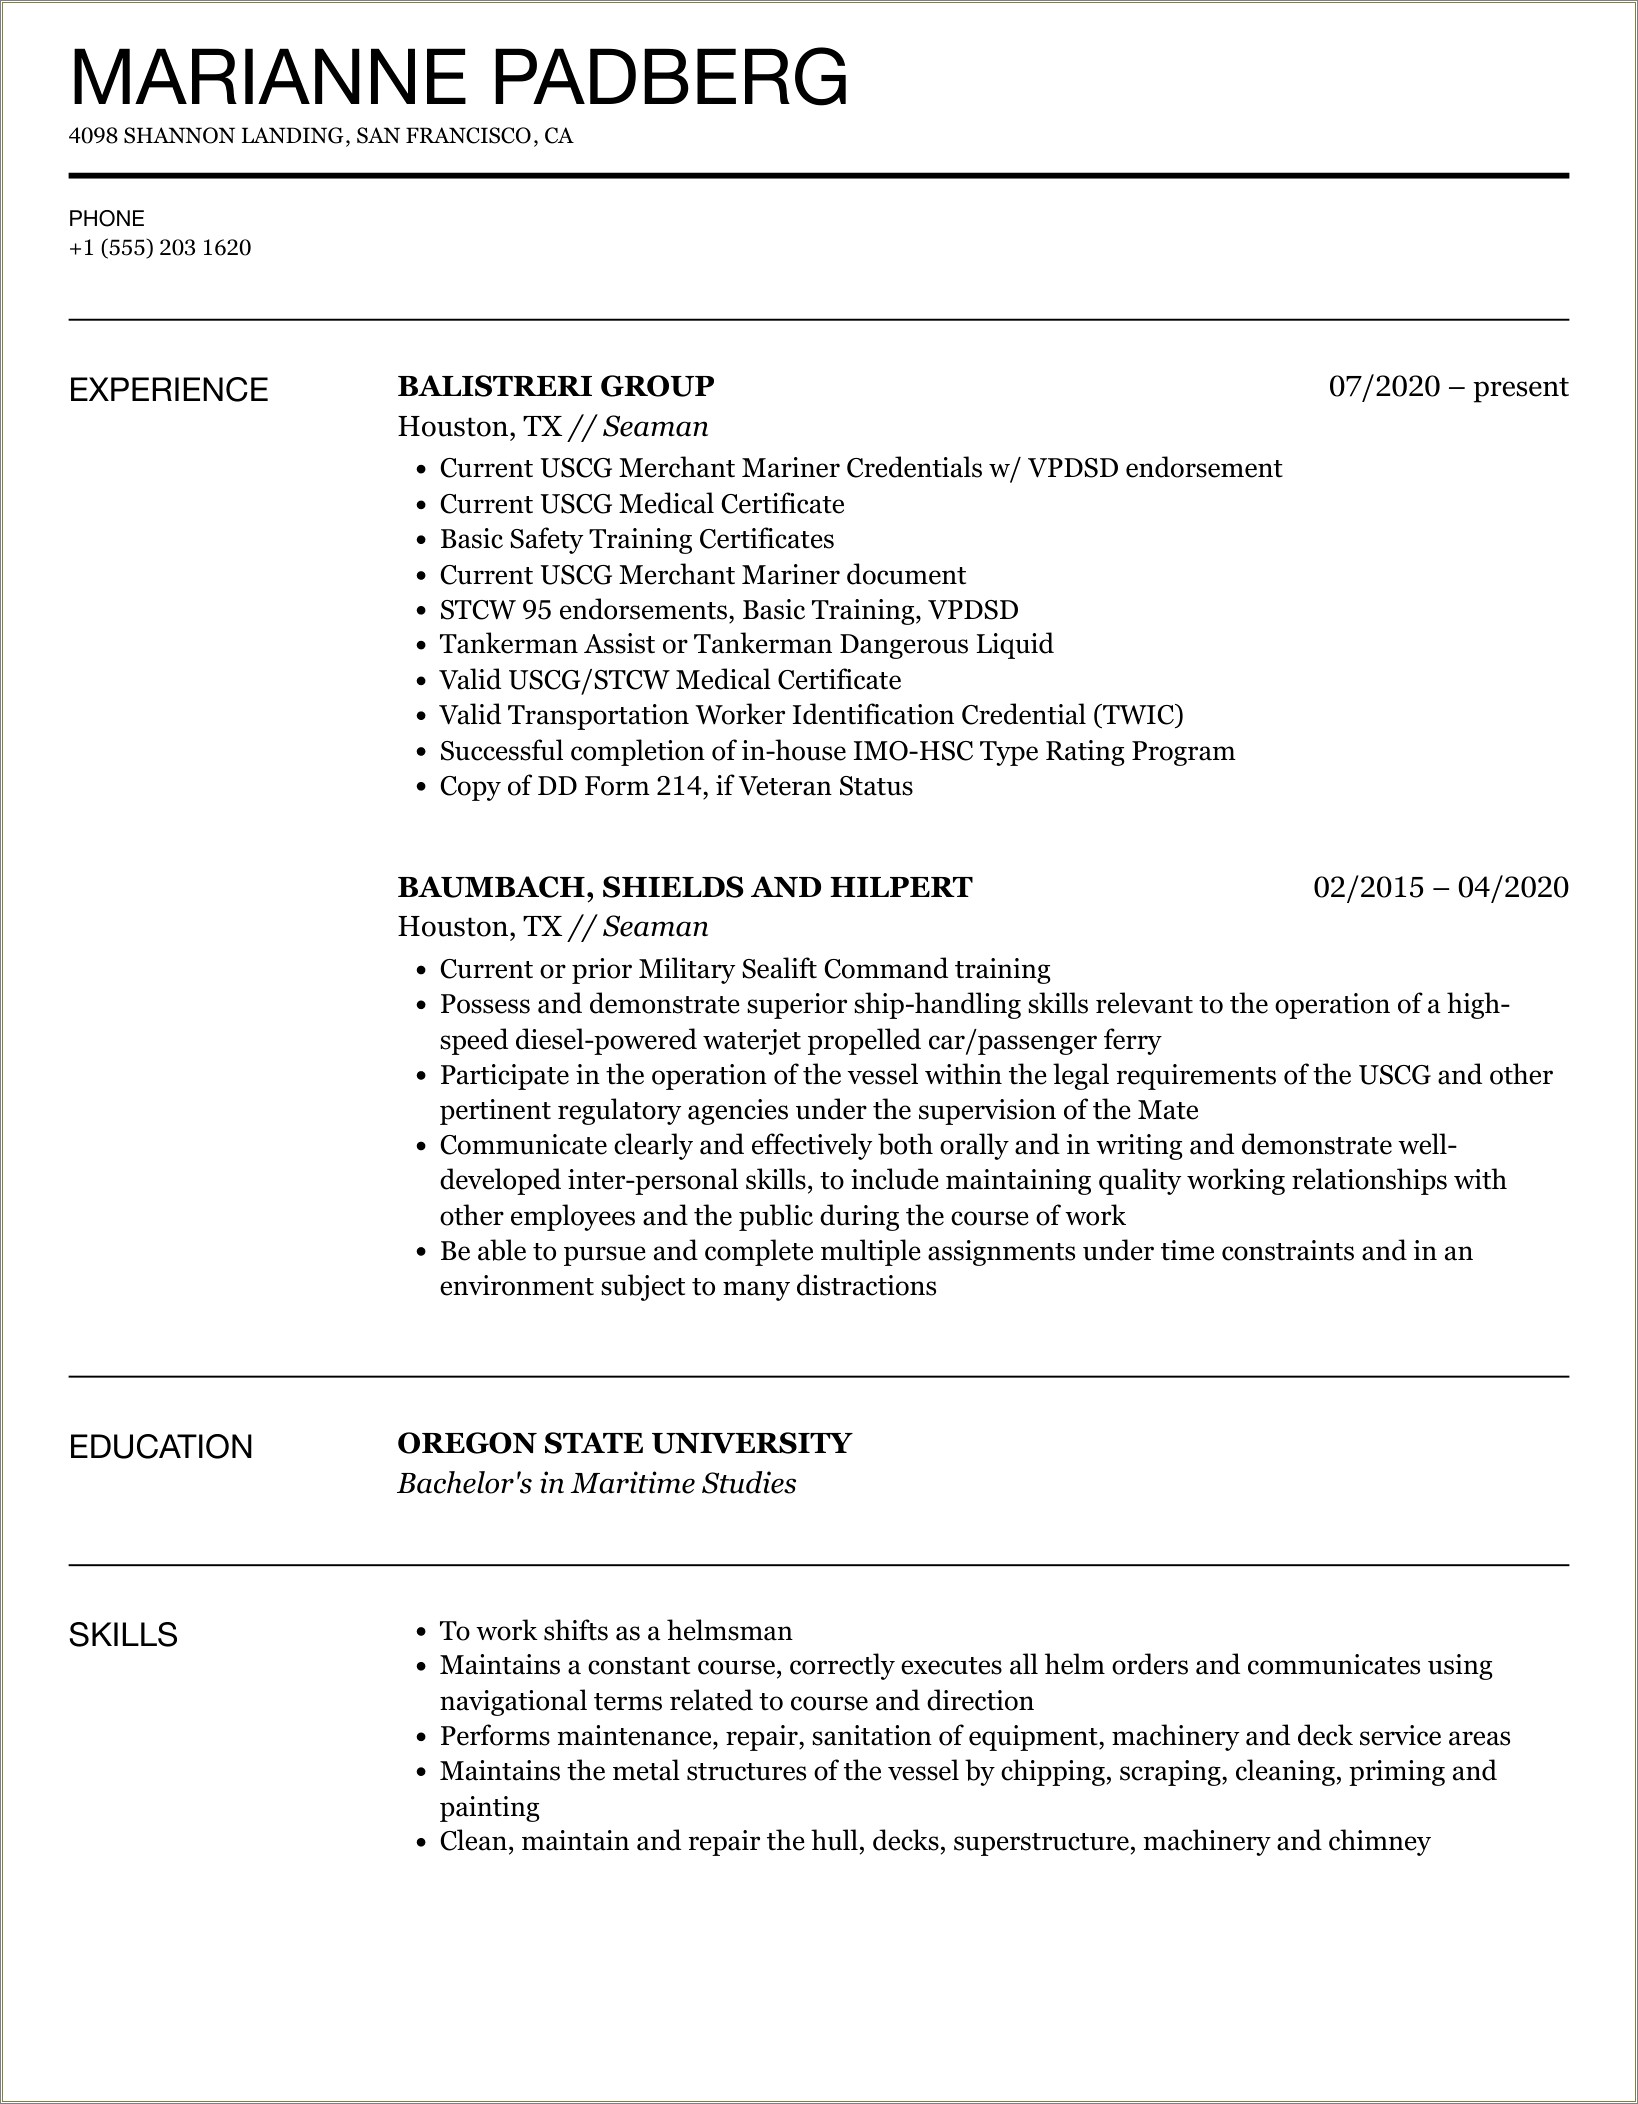 Sample Resume Philippines With Work Experience